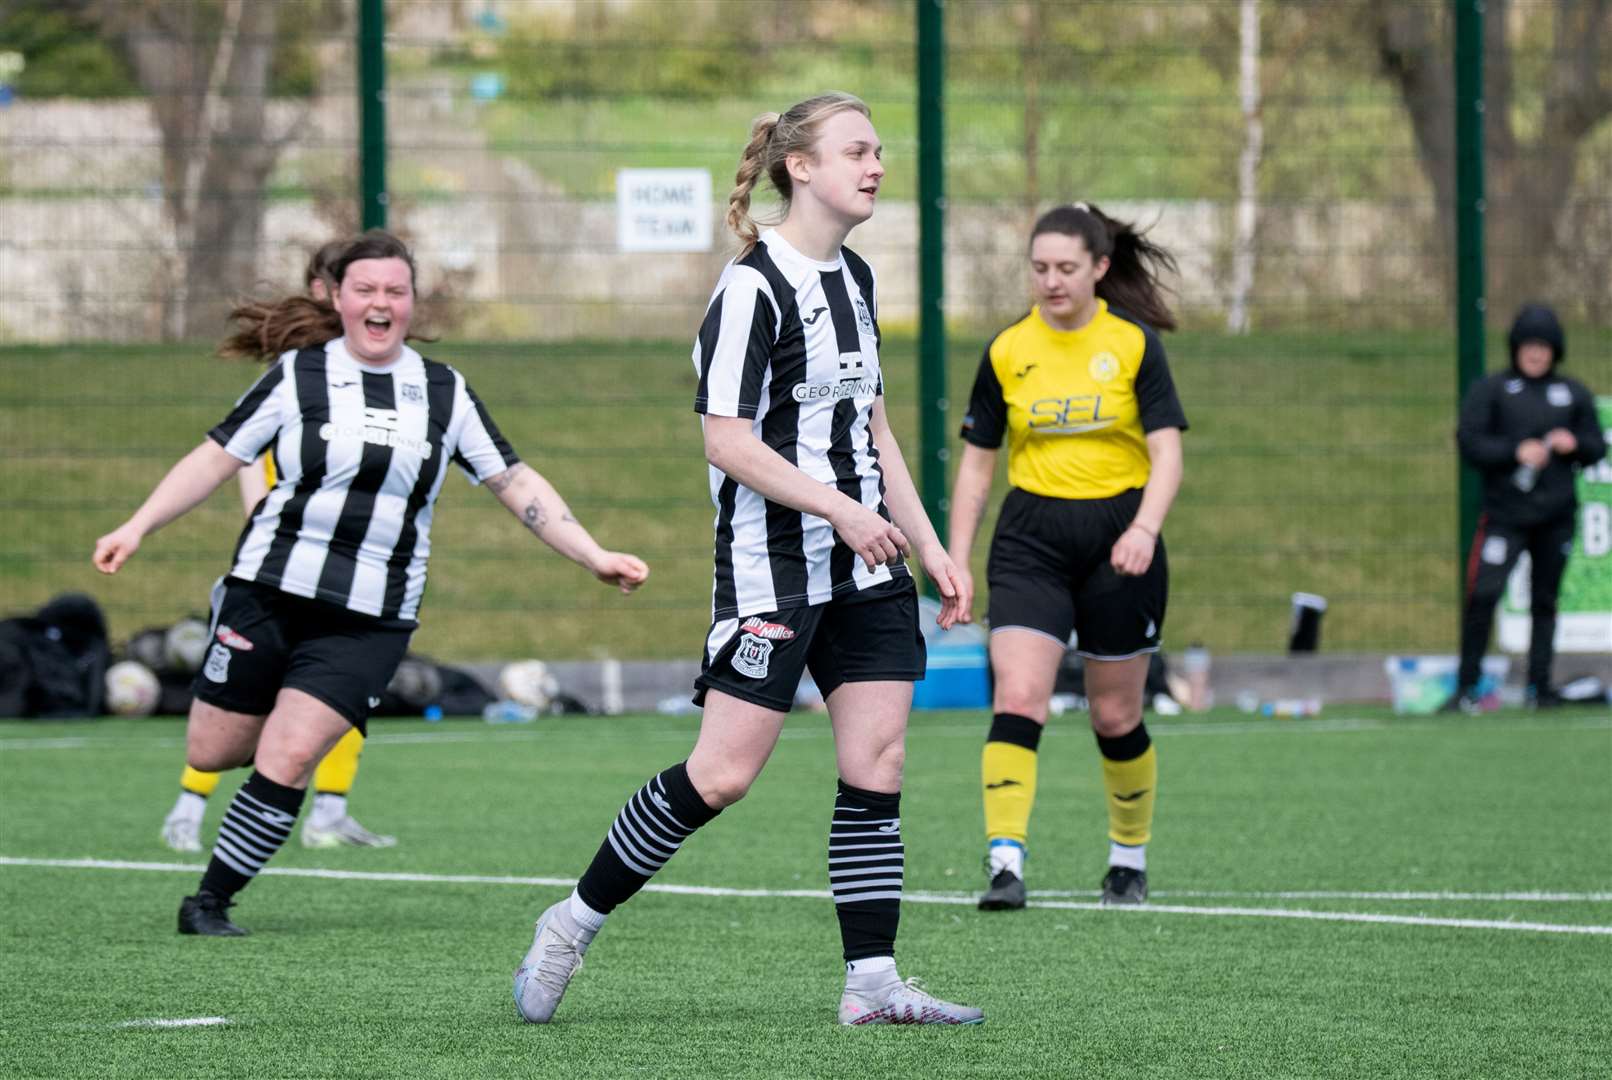 Making it 6-0 to the City, Sarah Westwood scores her fourth goal of the afternoon this time from the penalty spot.Picture: Daniel Forsyth.